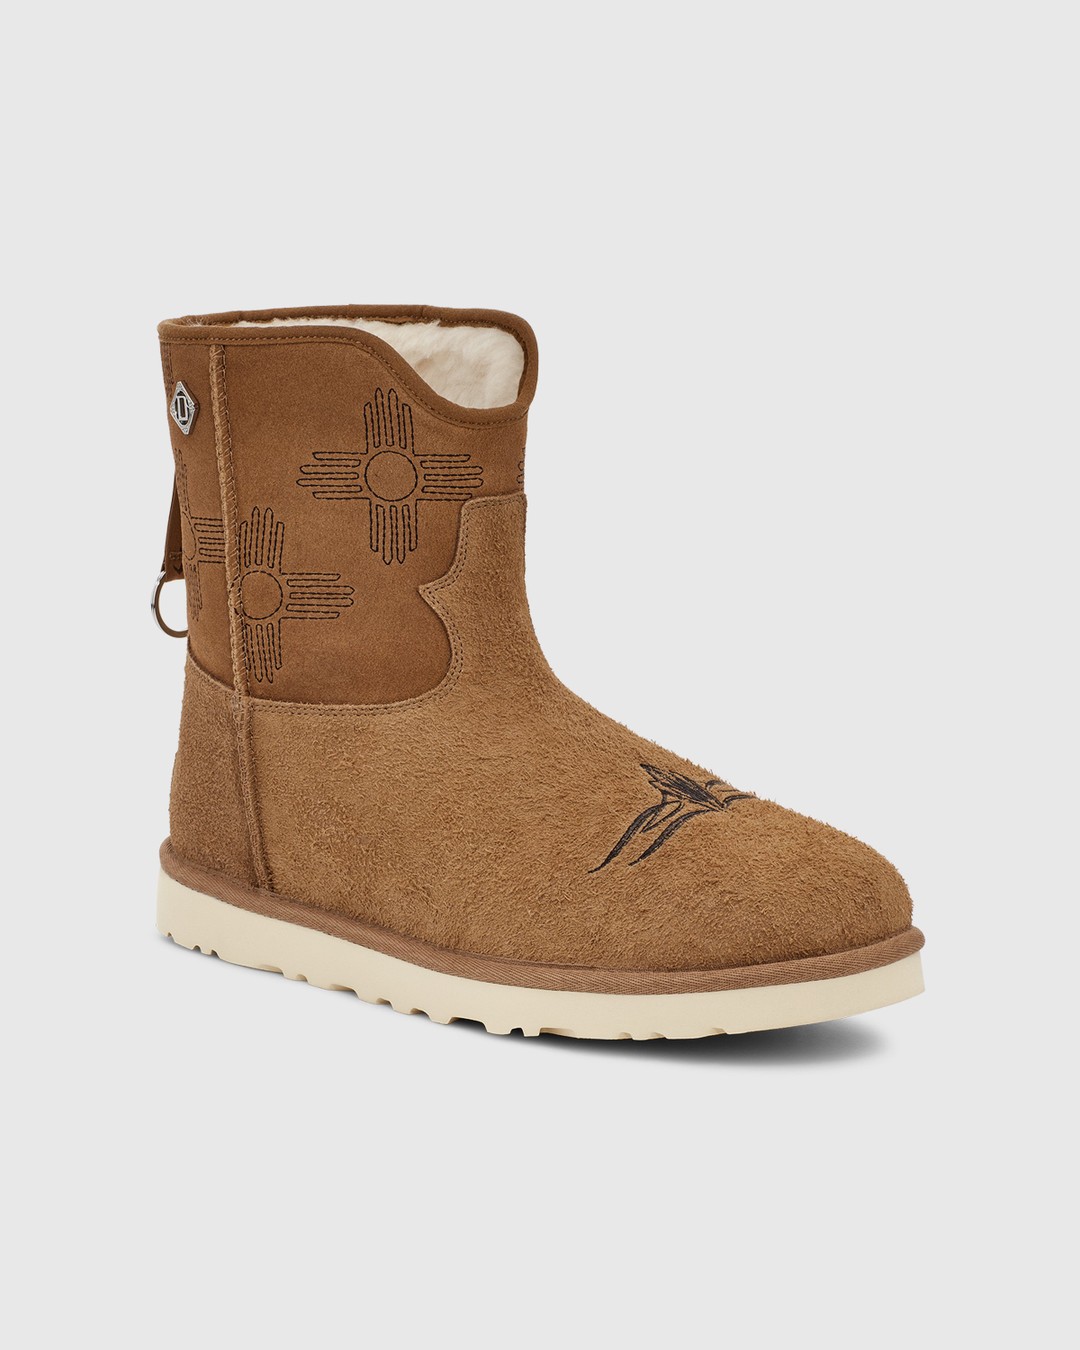 Ugg x Children of the Discordance – Classic Short Boot Brown - Lined Boots - Brown - Image 3